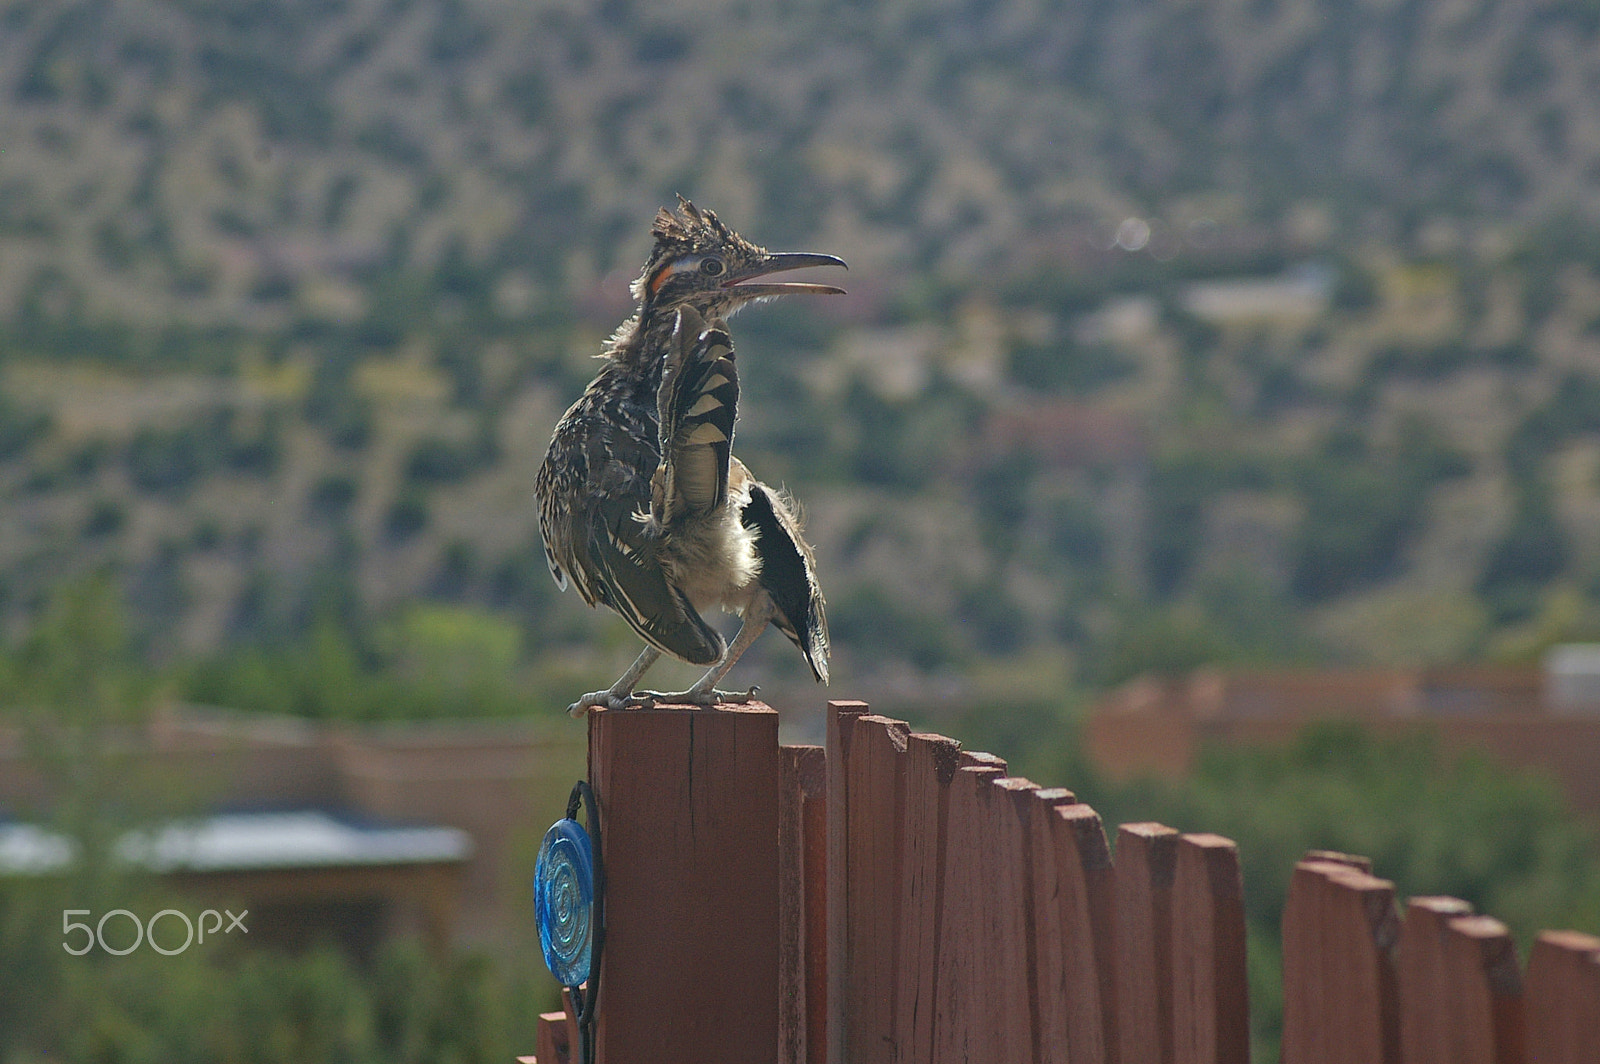 Pentax *ist DL sample photo. Roadrunner about to take off again photography